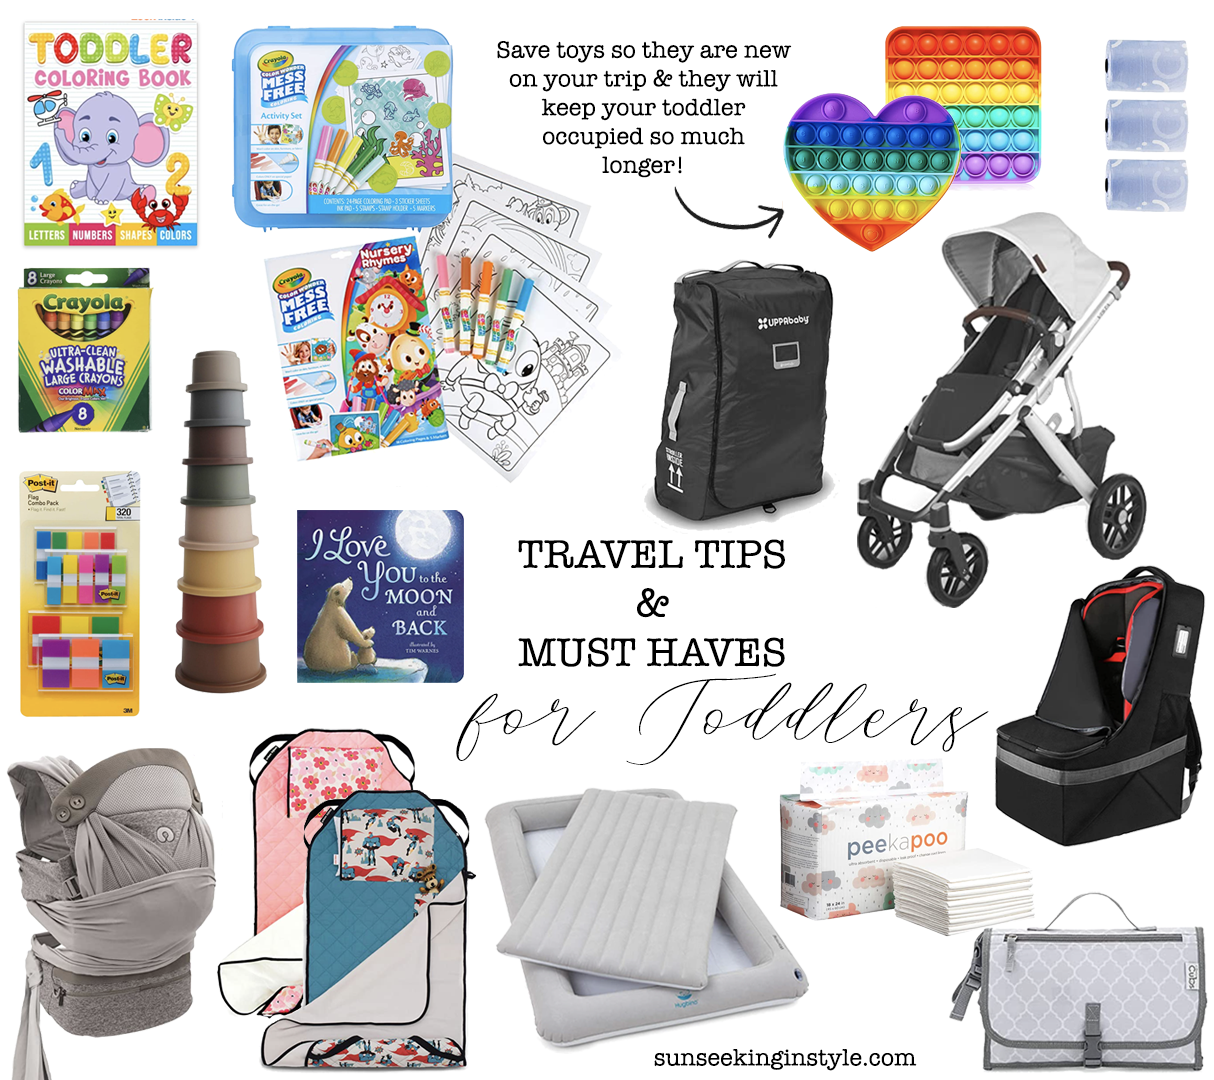 Tips for Traveling With Toddlers! – CollectiveLee